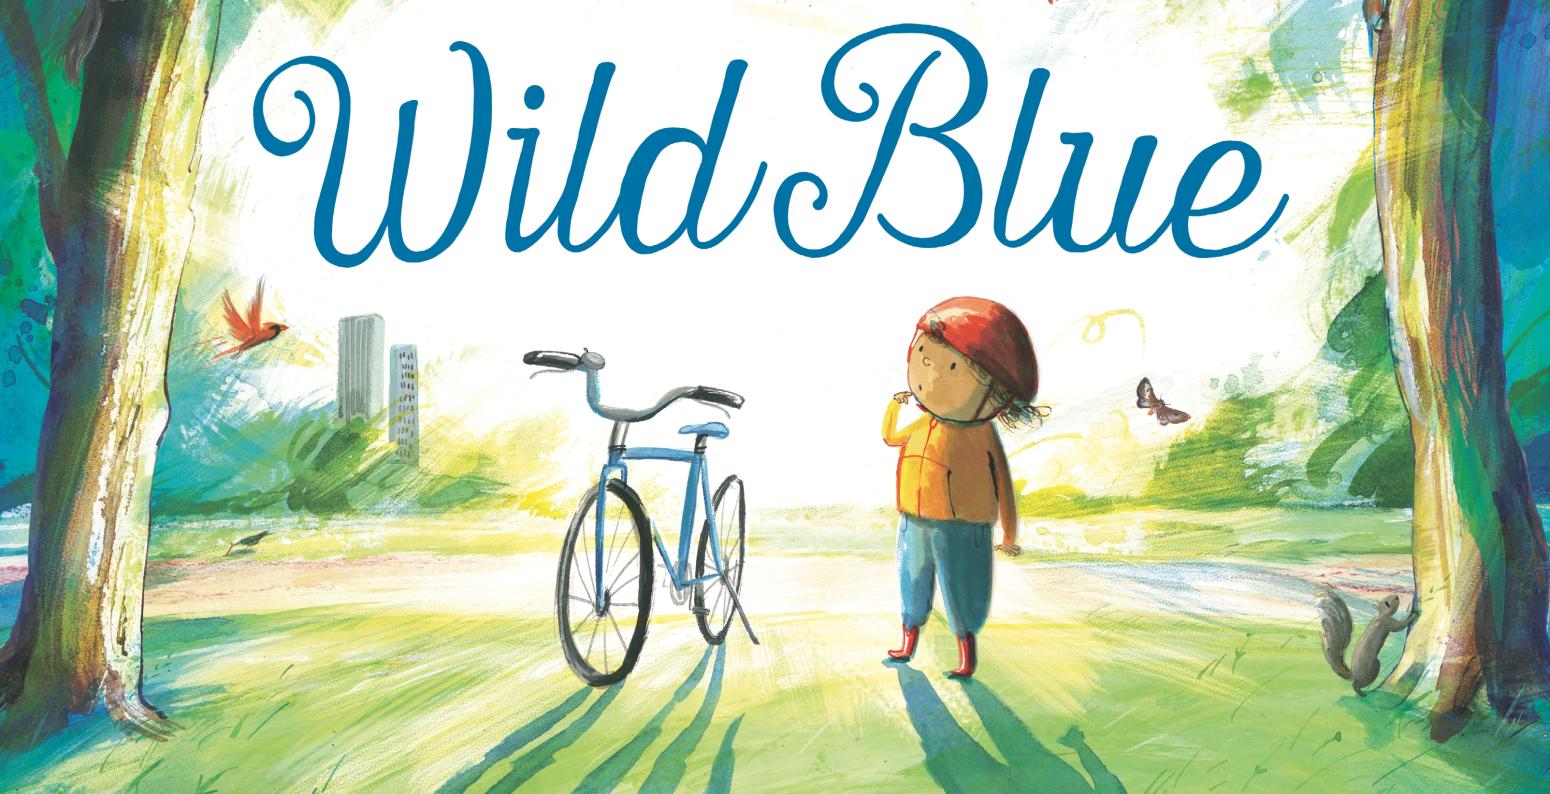 Cover illustration for Wild Blue, showing a child and bicycle between two trees. The shadow of the bike is shown as a horse.